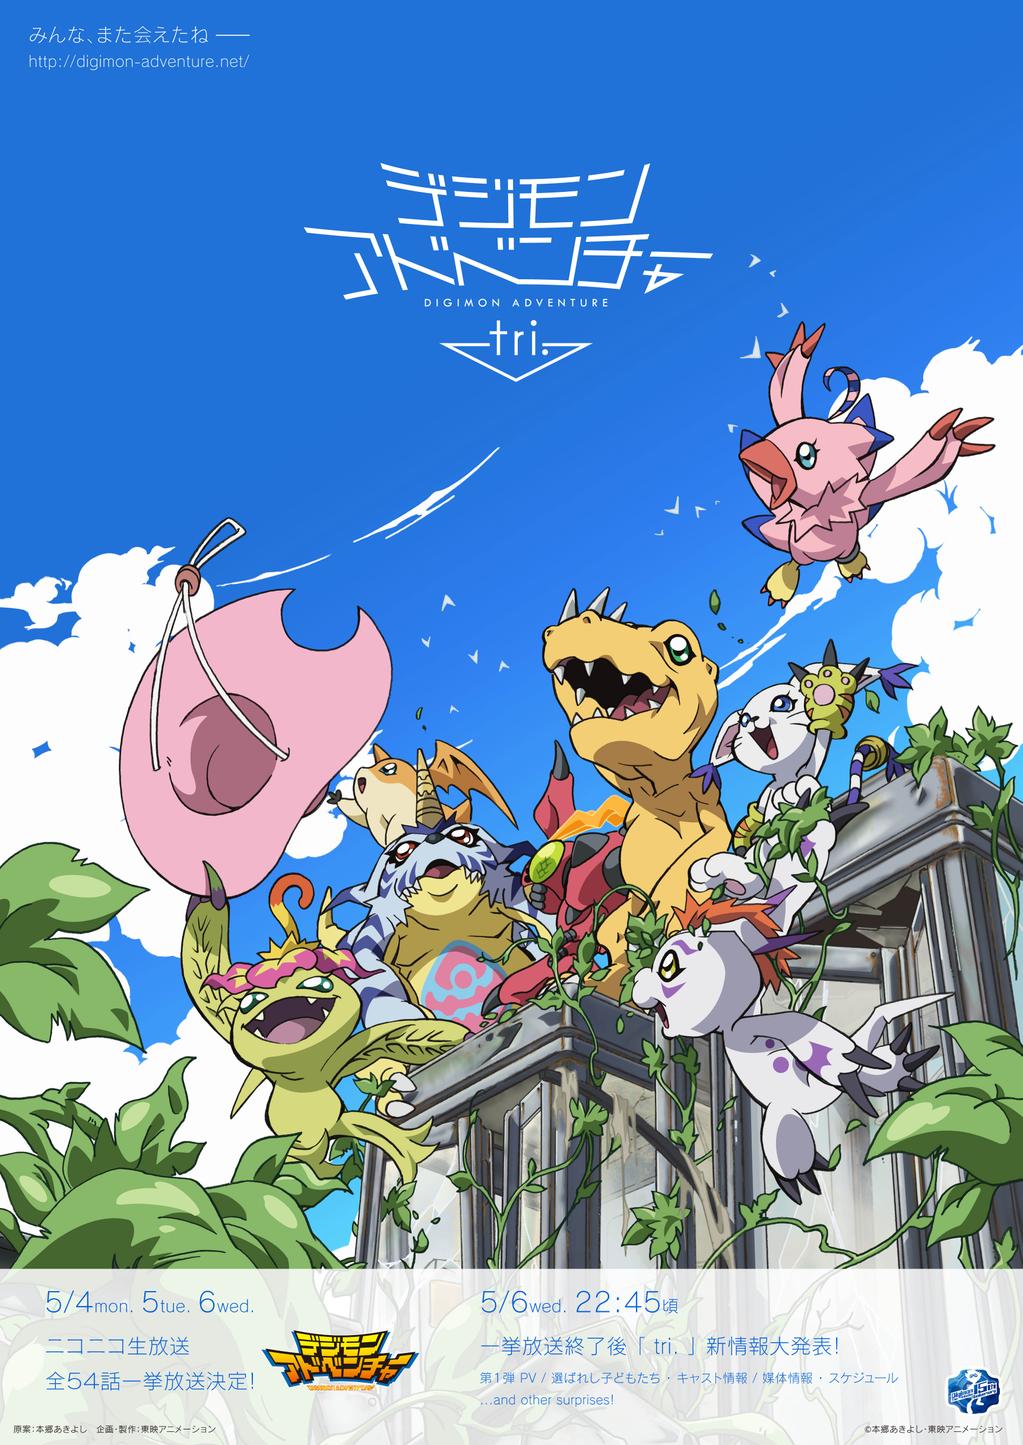 Digimon Adventure Tri. PV to Debut on May 6